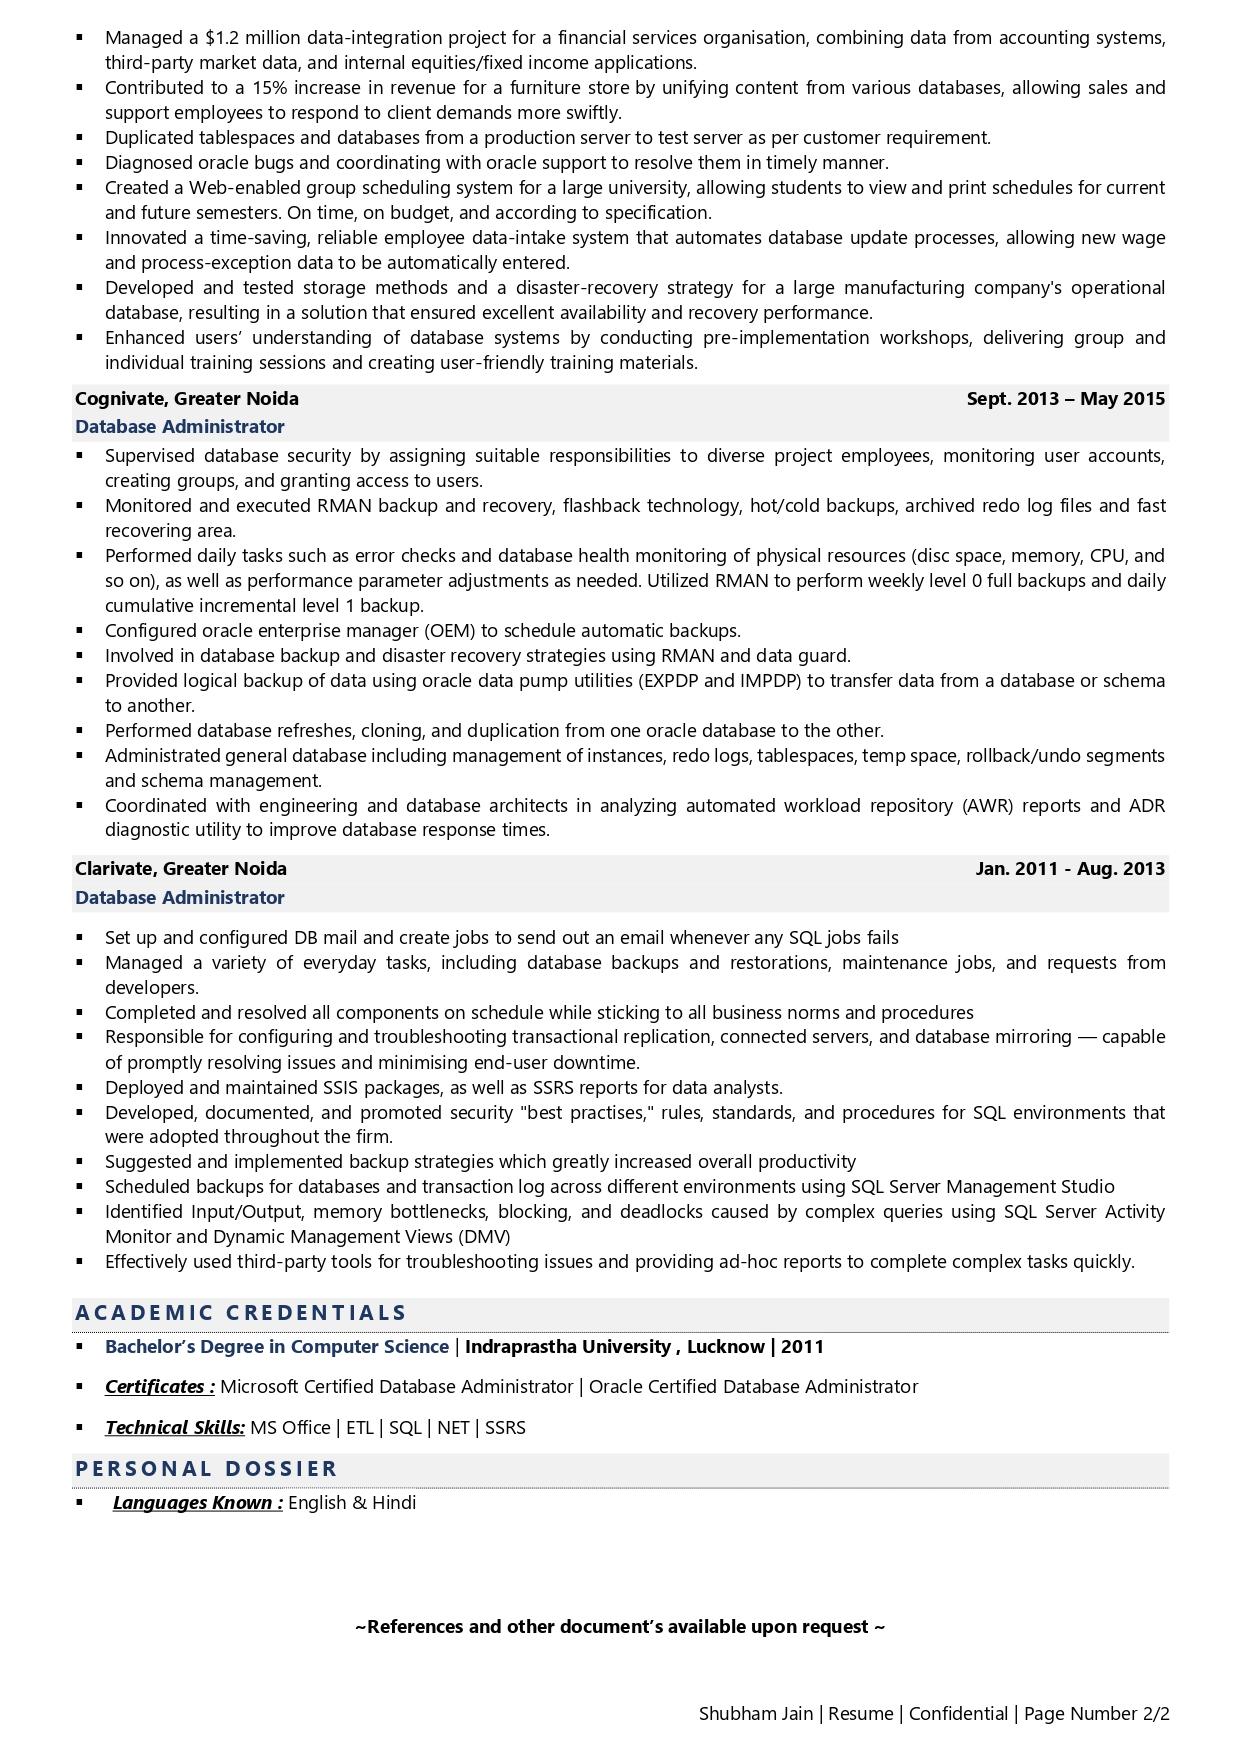 Database Administrator - Resume Example & Template